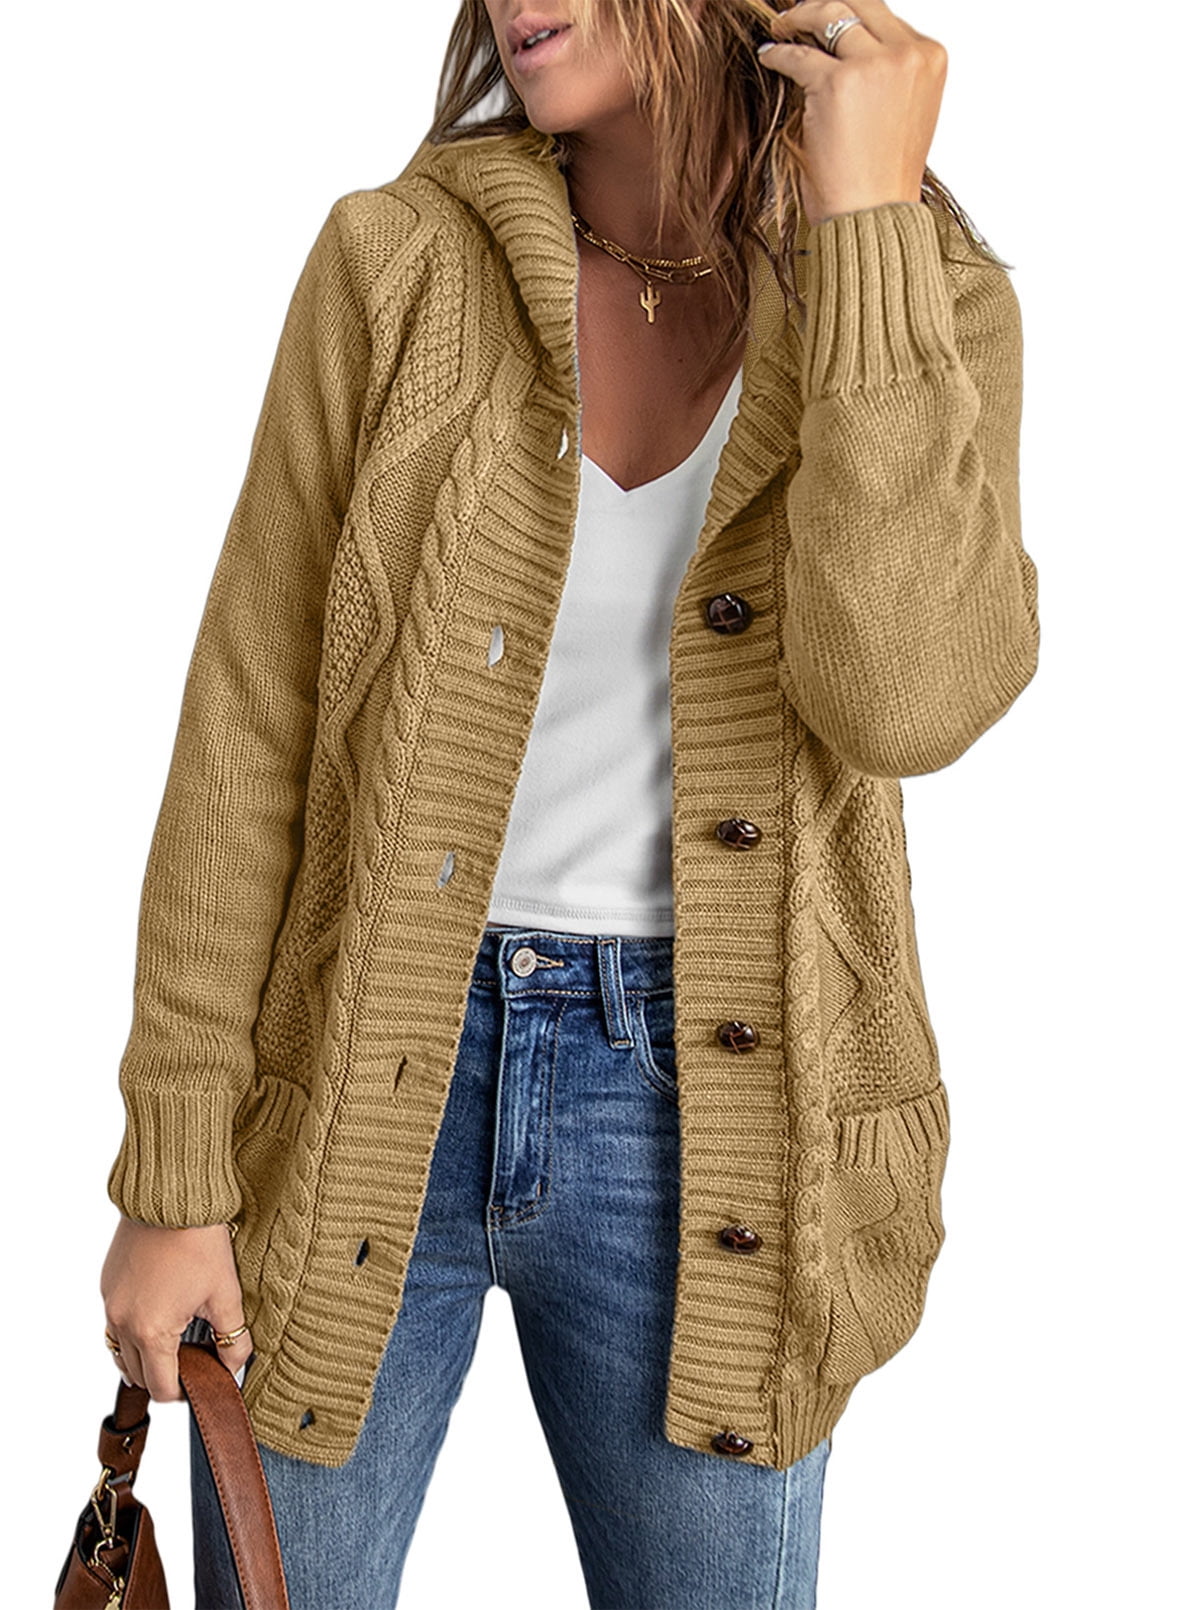 Eytino Hooded Cardigan Sweaters for Women Long Sleeve Button Down Knit ...